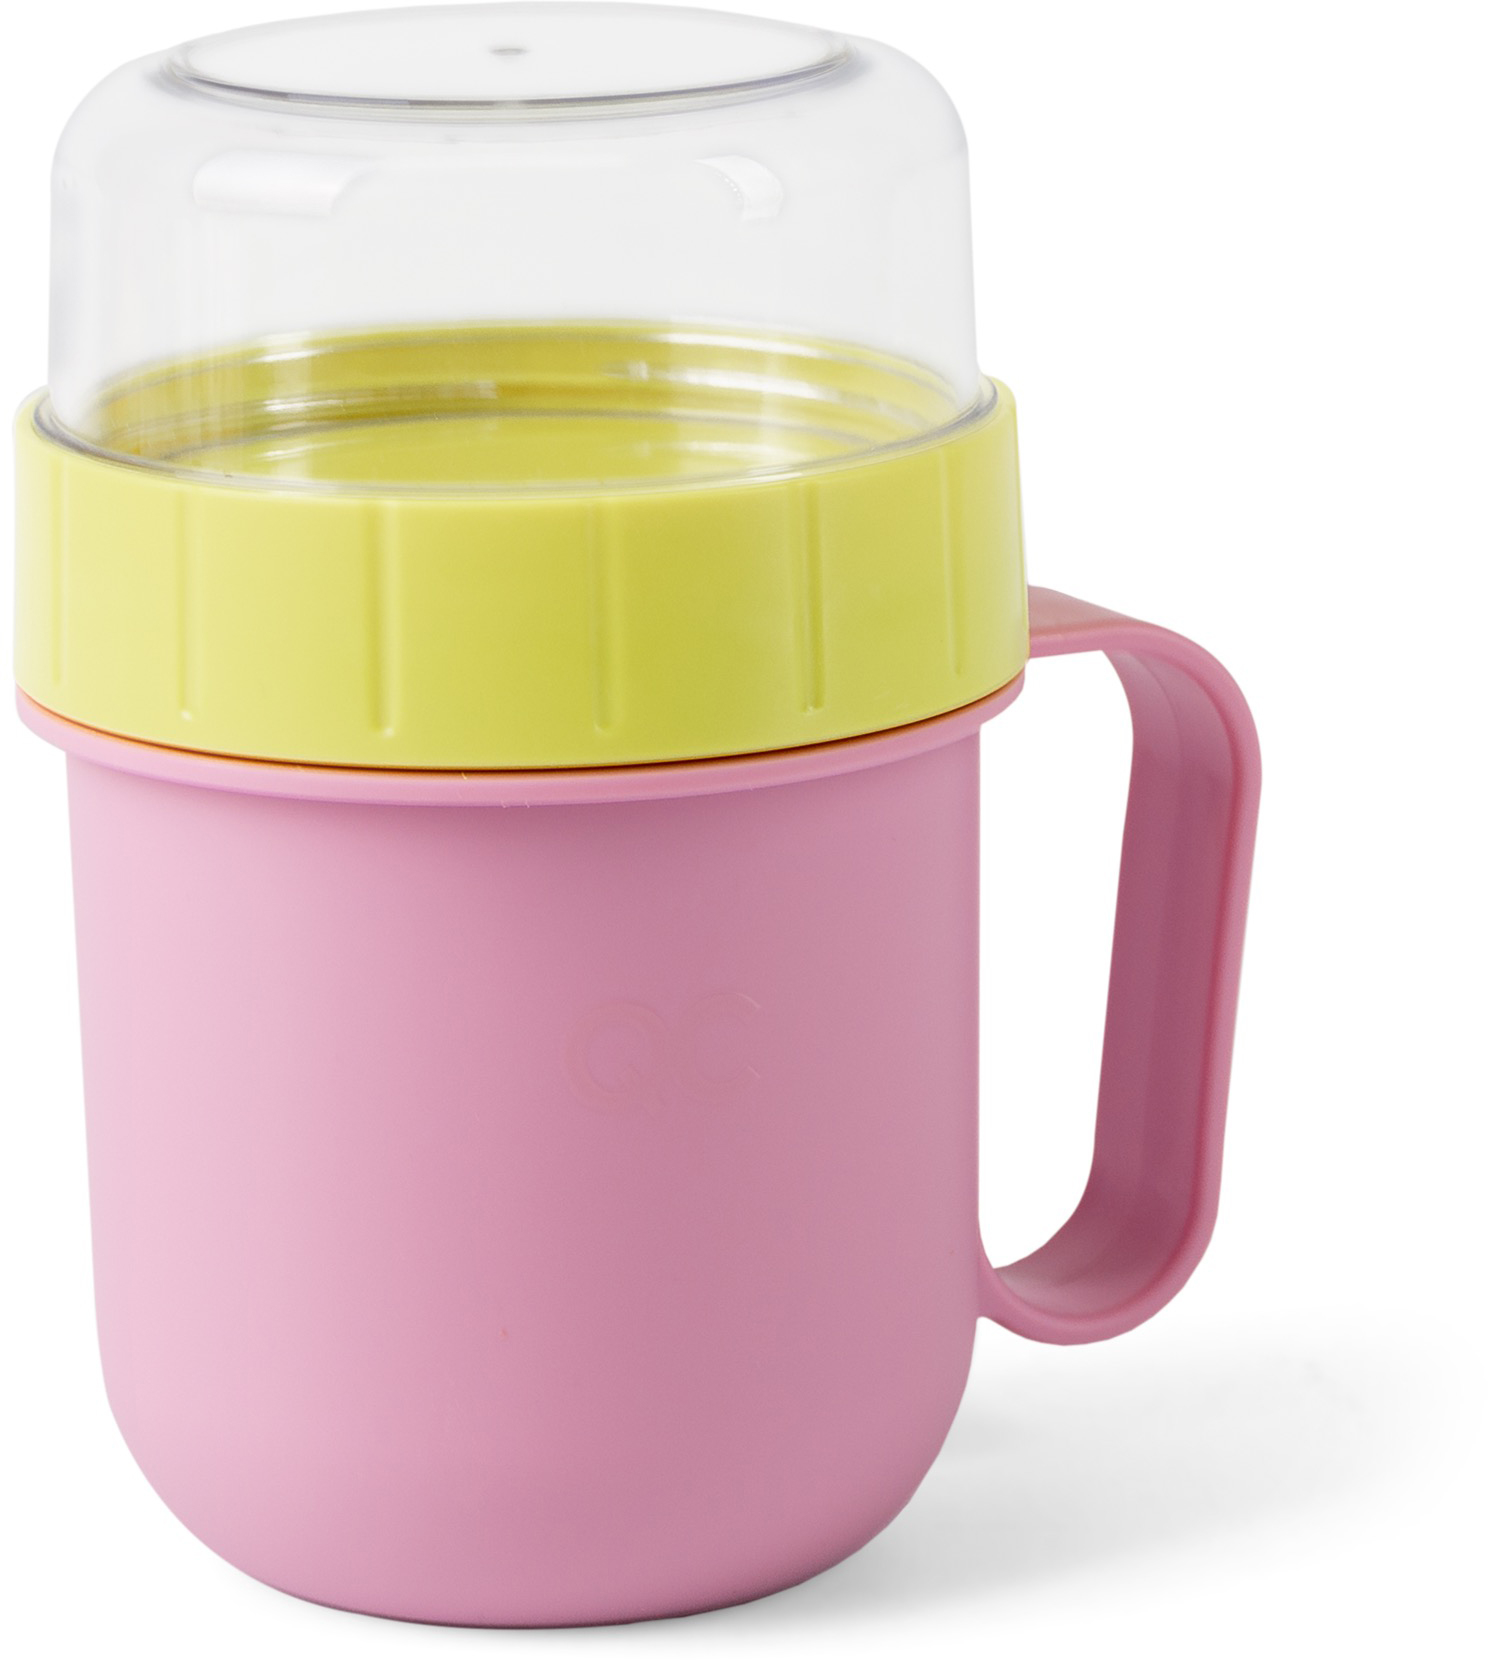 ROOST Lunch mug 13x10x15mm 497741 bubble gum pink/lime